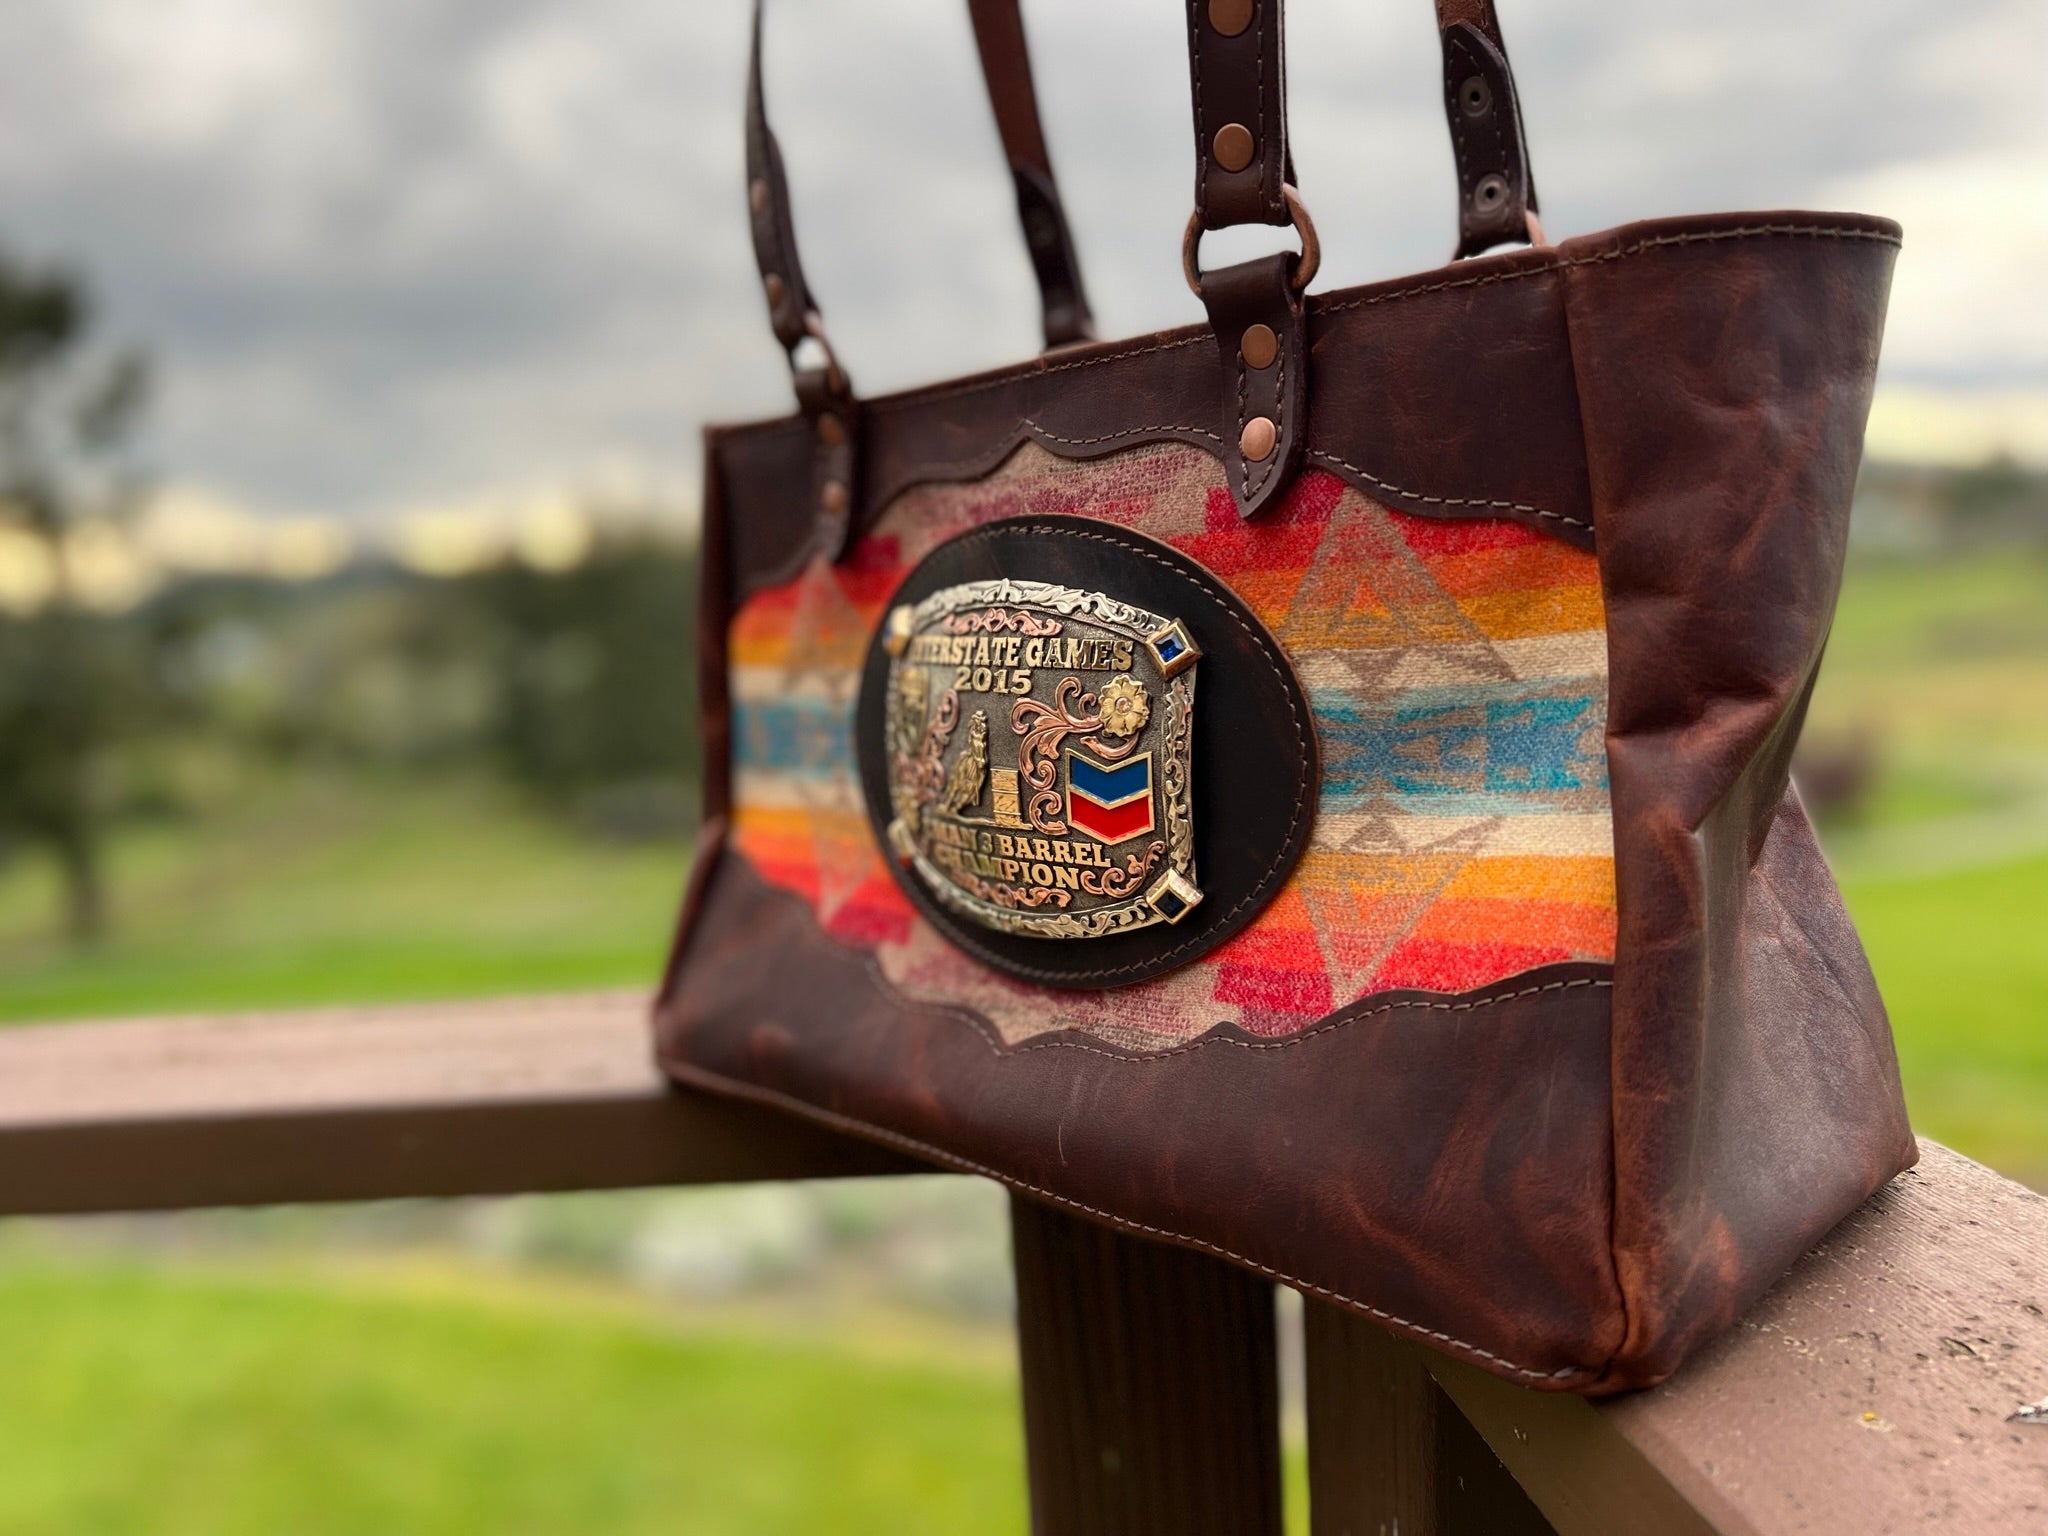 Buckle Bunny Trophy Buckle Bag – The Rebel Rose Leather Goods